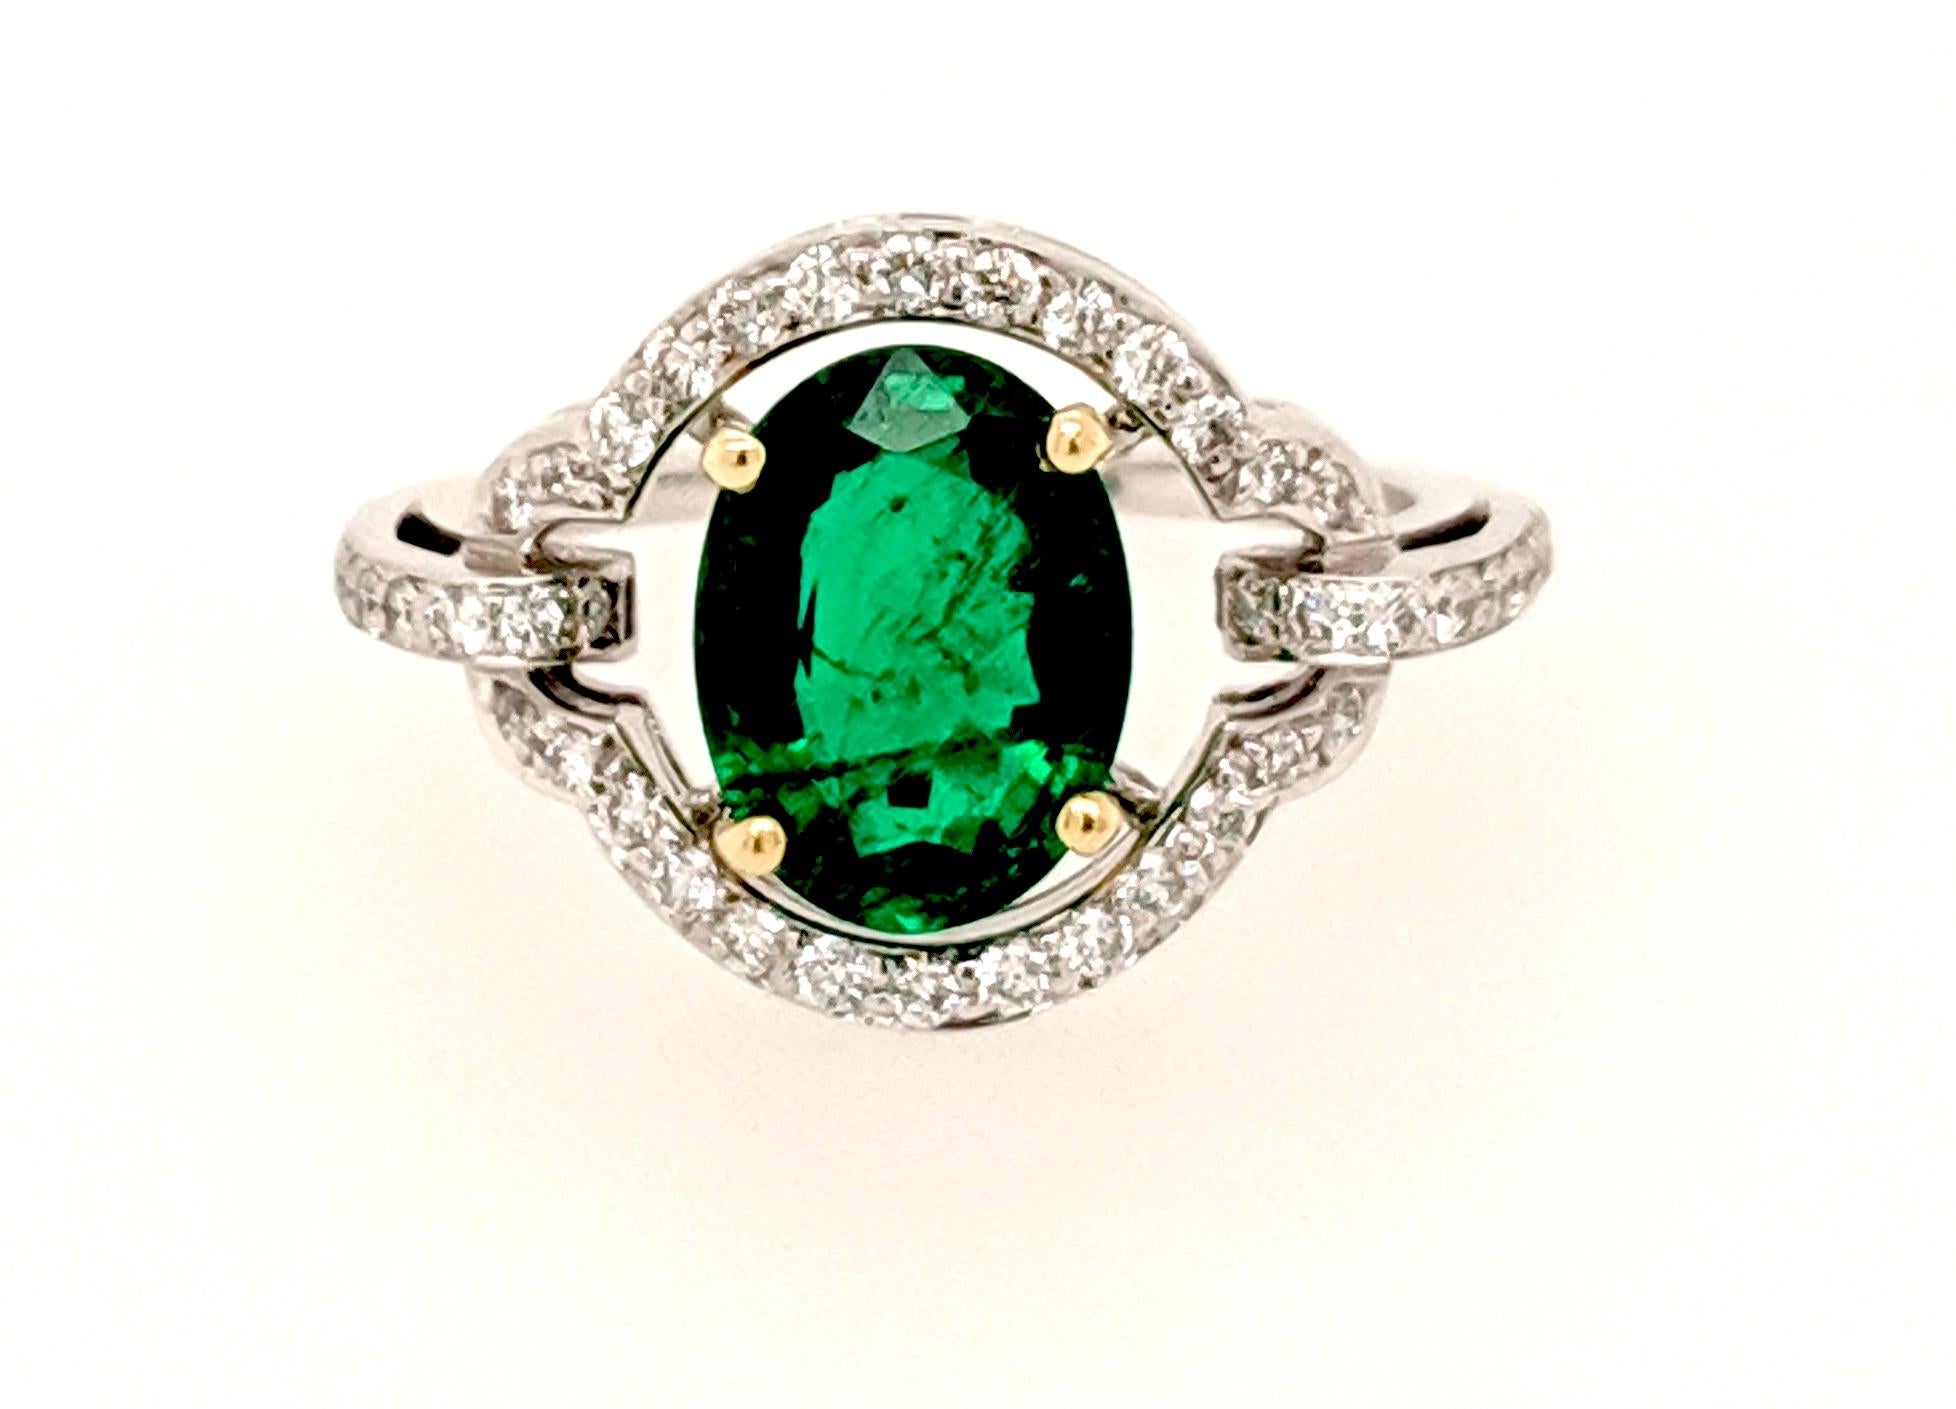 The Cocktail ring is crafted in 18k white and yellow gold featuring (1) oval shaped emerald weighing 1.70ct of African origin and surrounded by (48) round diamonds weighing .34cttw with a color of G/H and a clarity of VS2 to SI1. The ring is a size